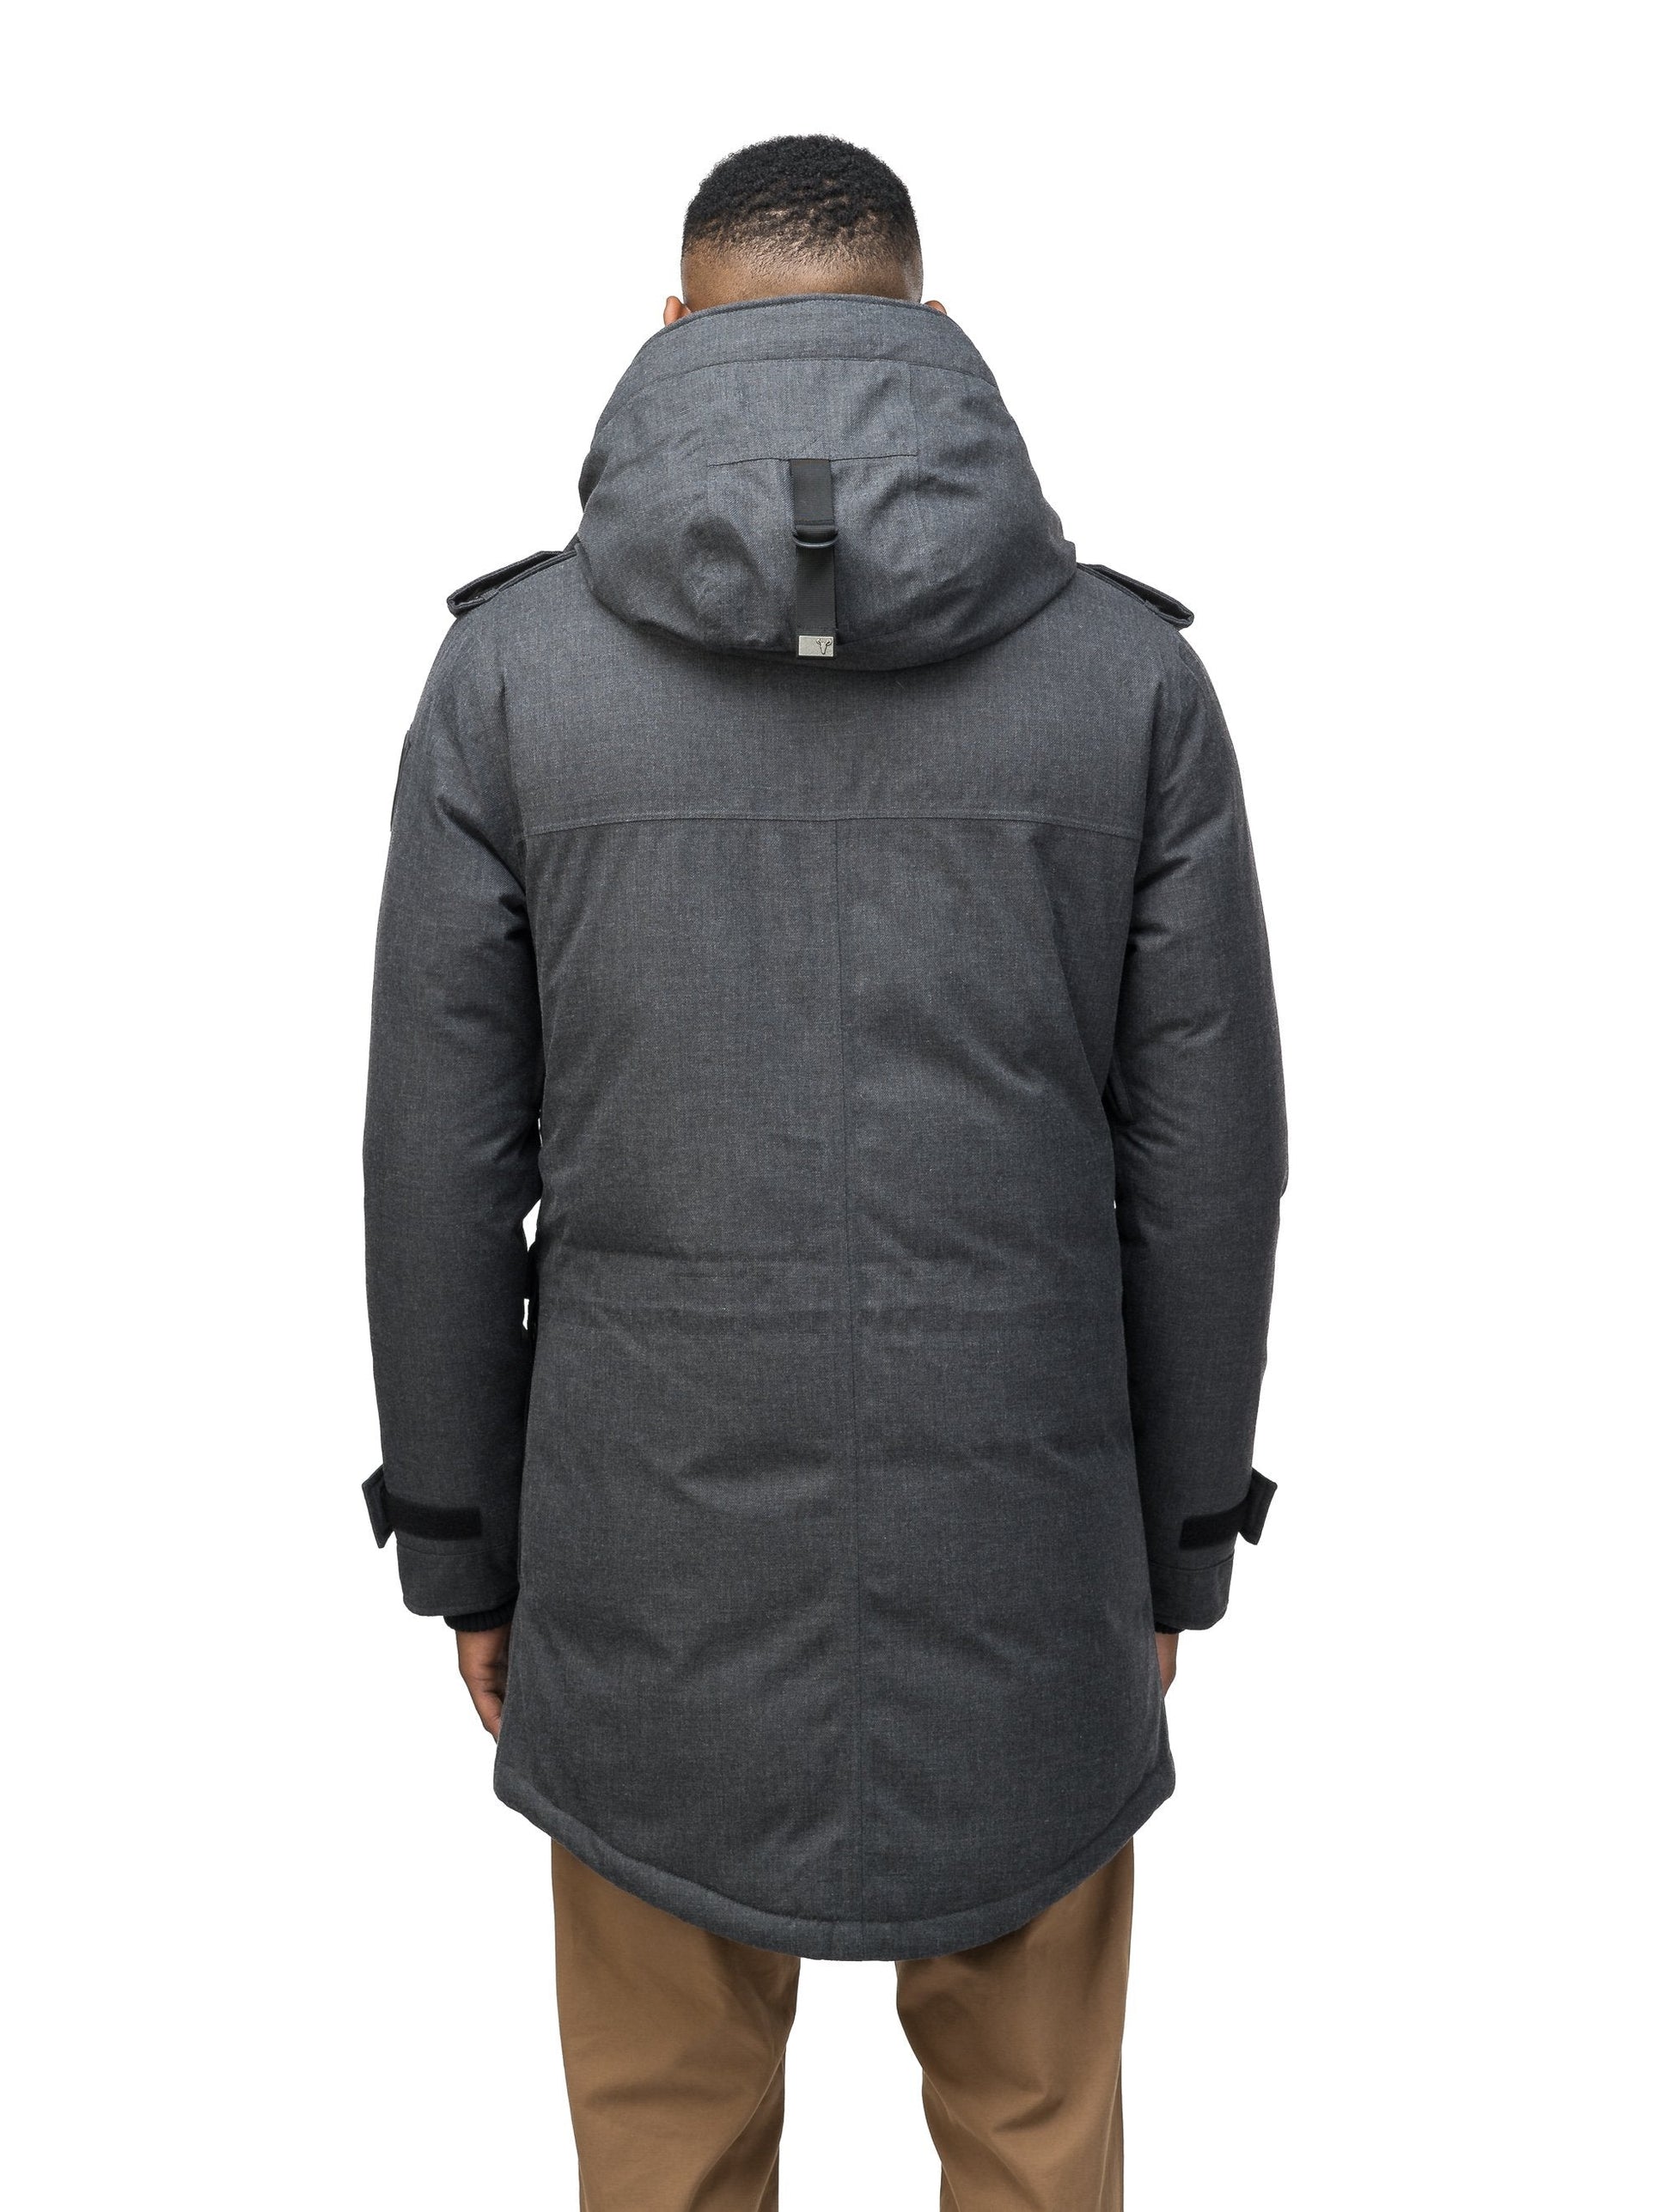 Men's down filled parka with faux button magnet closures and fur free hood with a fishtail hemline in H. Charcoal